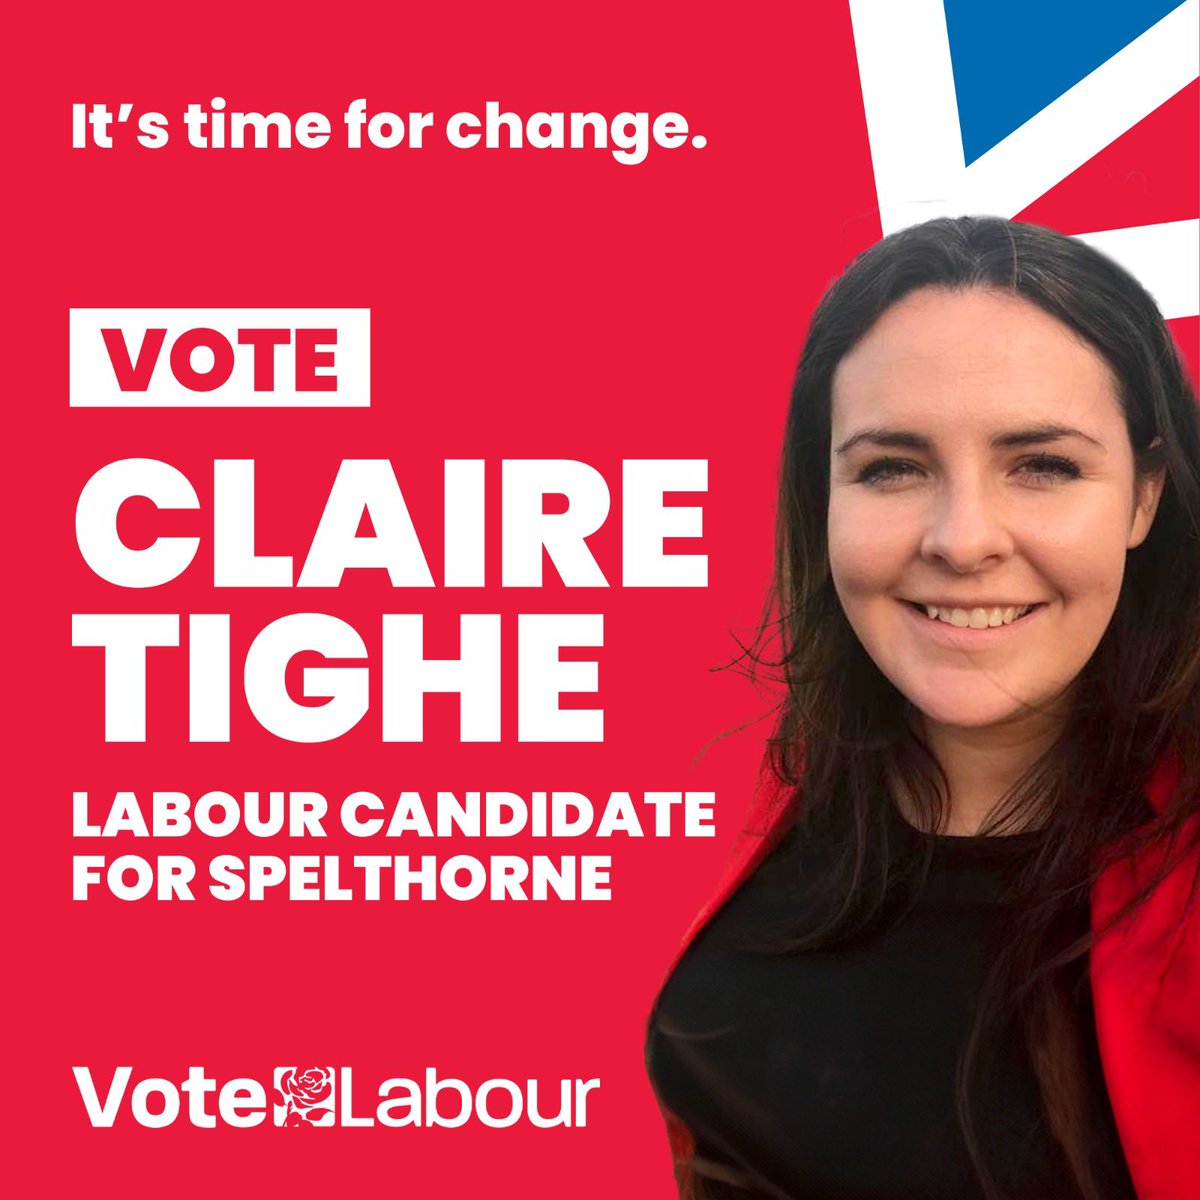 We are pleased to officially announce our General Election candidate is Claire Tighe @claire_tigher An excellent candidate who can be the first Labour MP for Spelthorne since 1945. #VoteLabour #Spelthorne